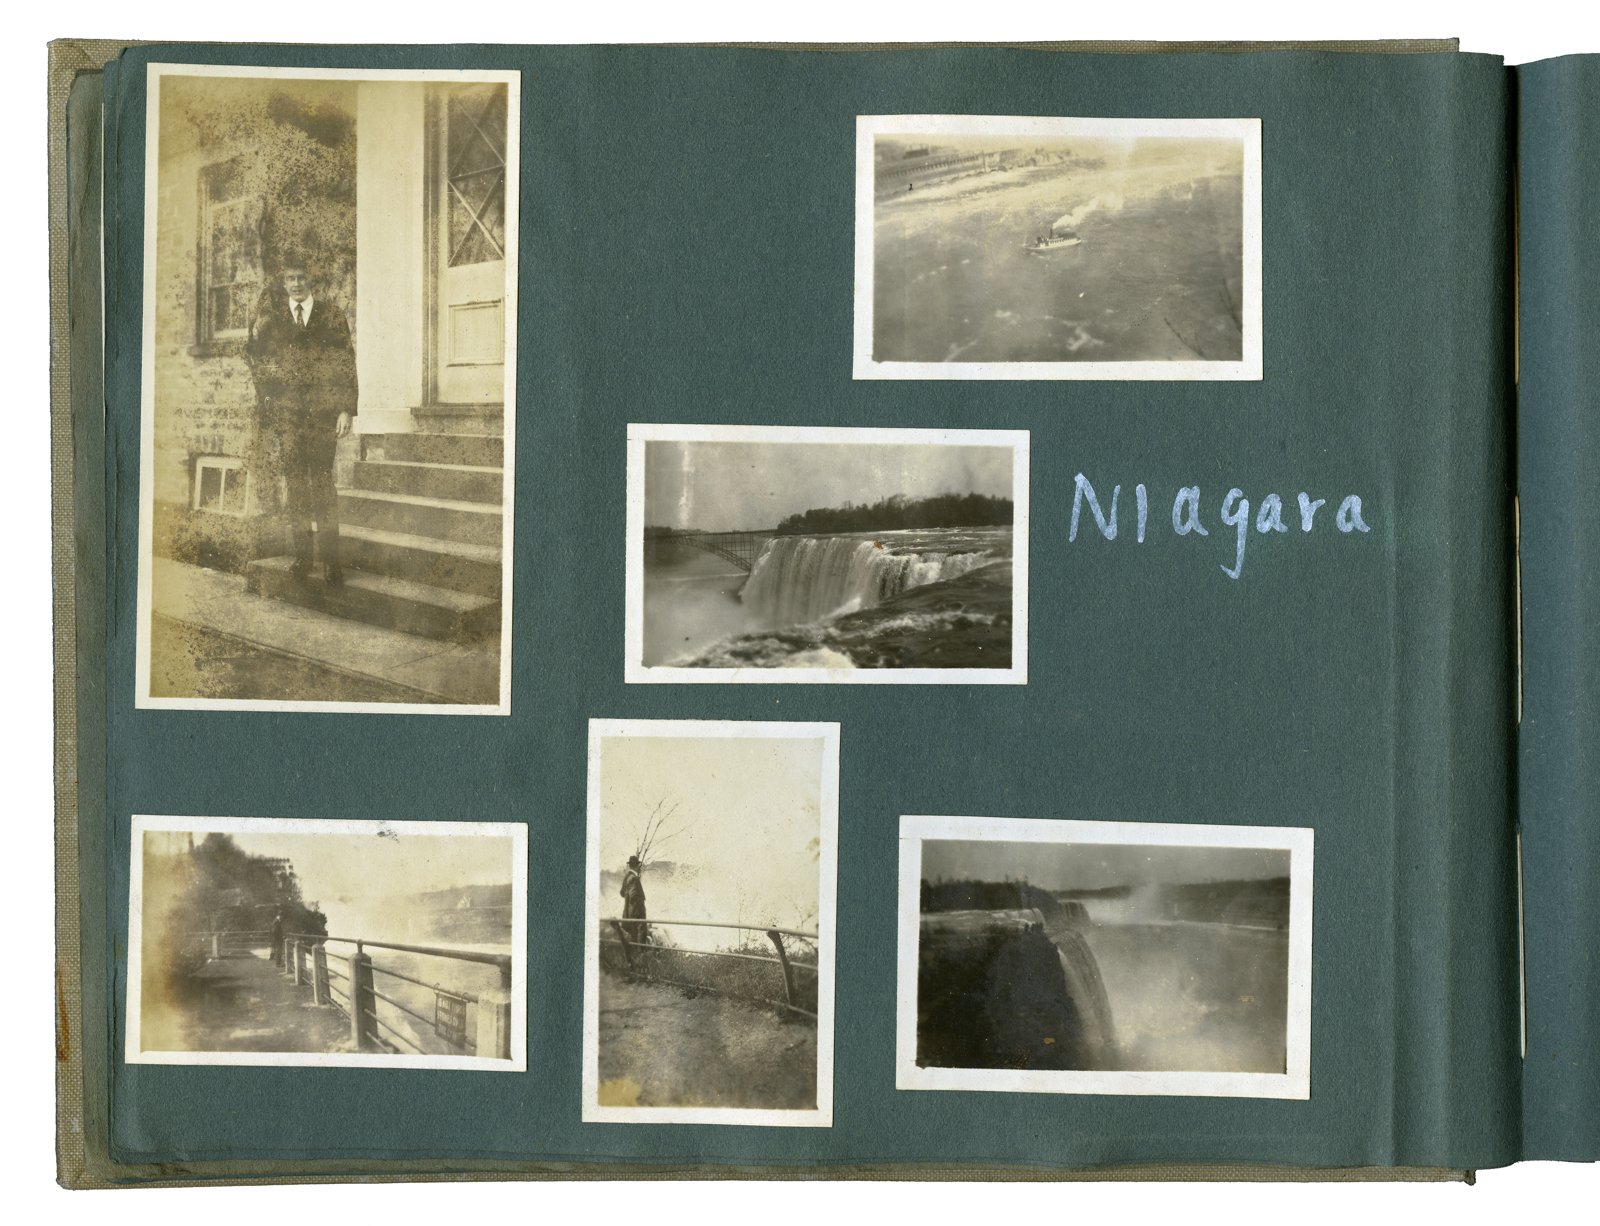 Selected pages from Eric Scott’s photo album charting his travels in North America from Princeton, New Jersey, U.S. en route to Pasqua, Saskatchewan via Niagara Falls.